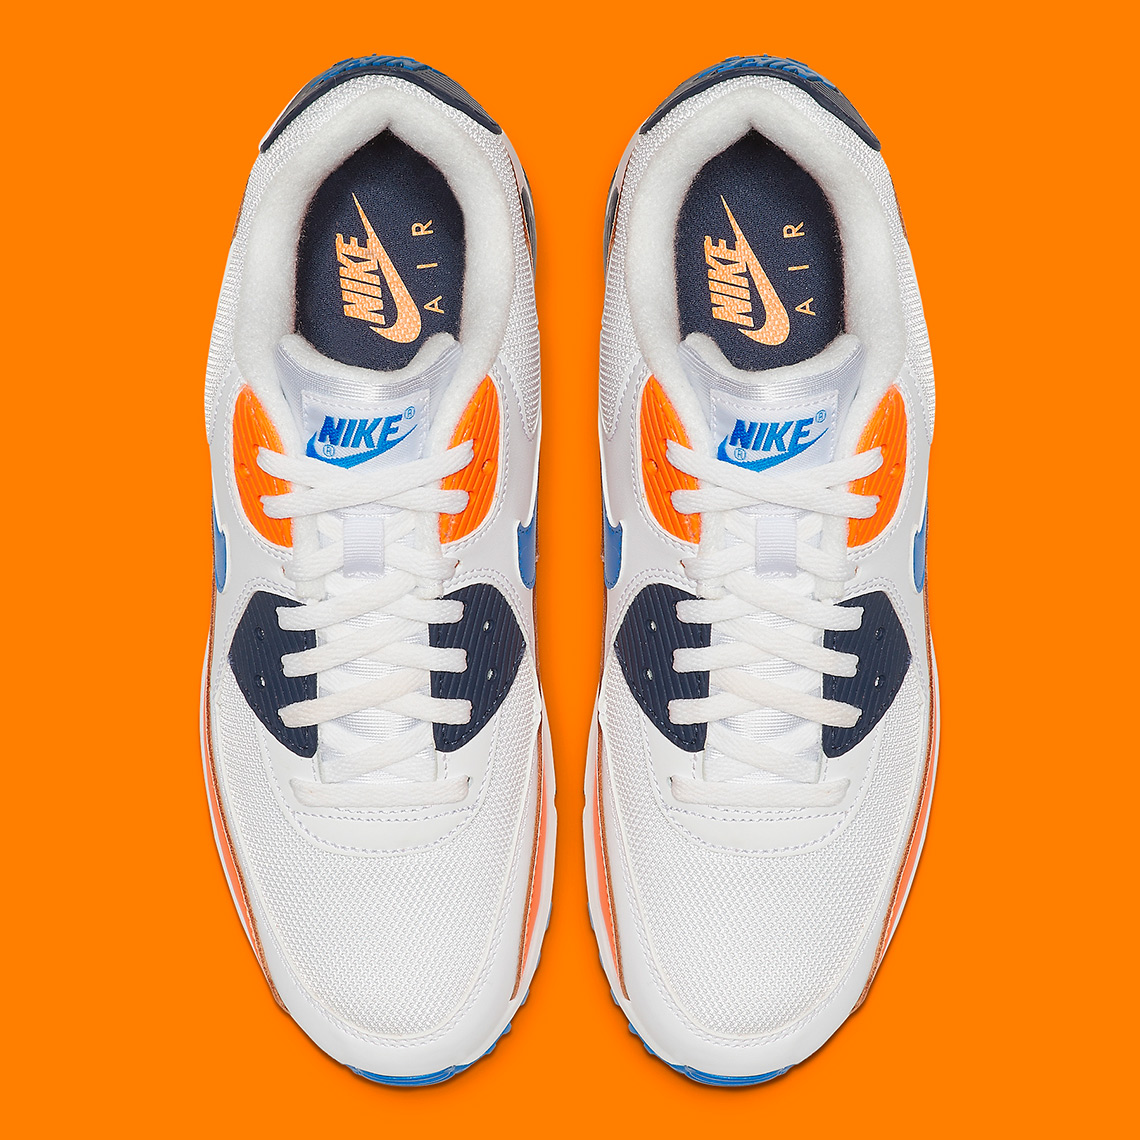 the 'air max 90 releases in a vintage friendly blue and orange